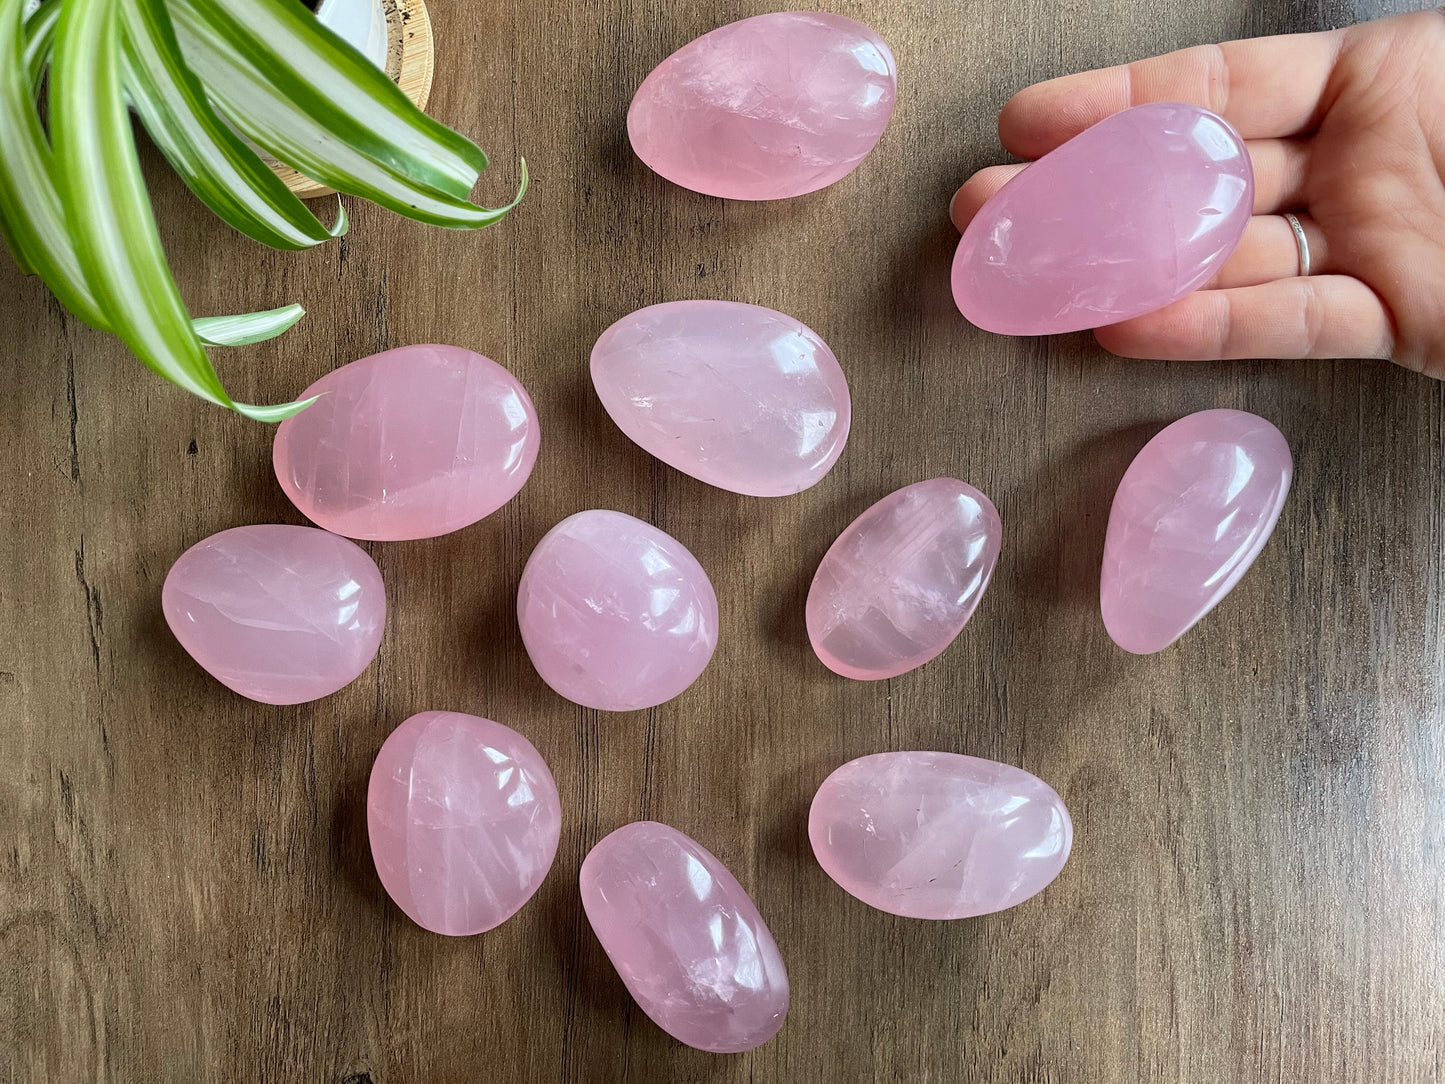 Pictured are various polished rose quartz palm stones.